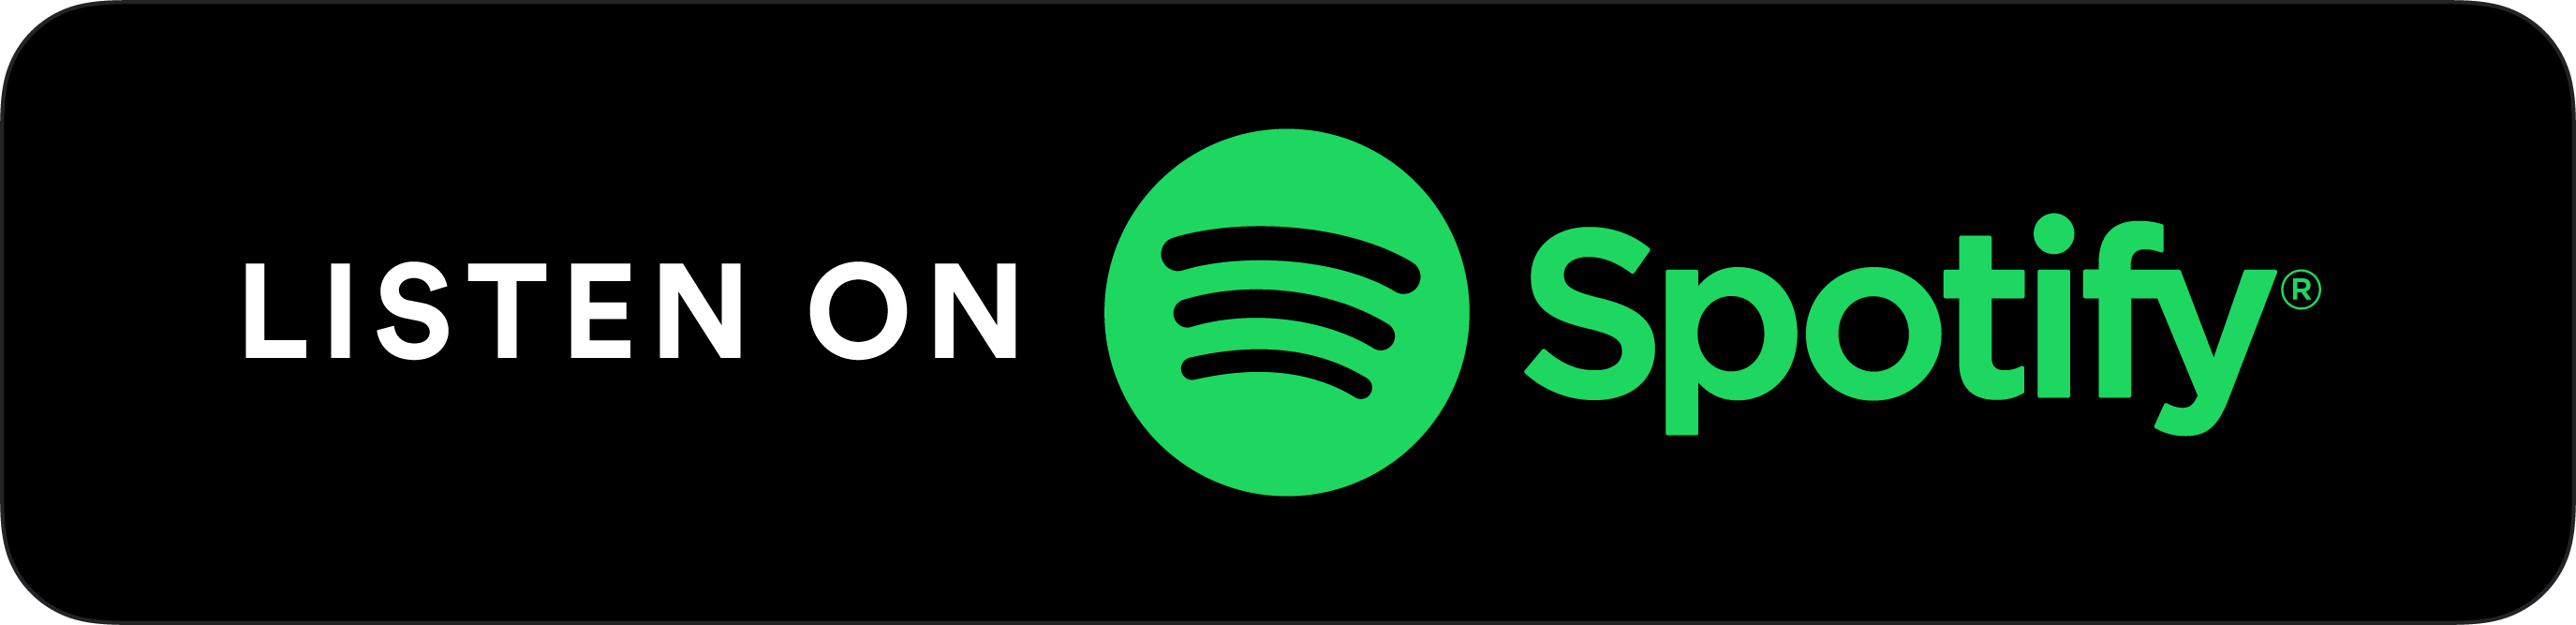 A black button says Listen on Spotify in white and green text